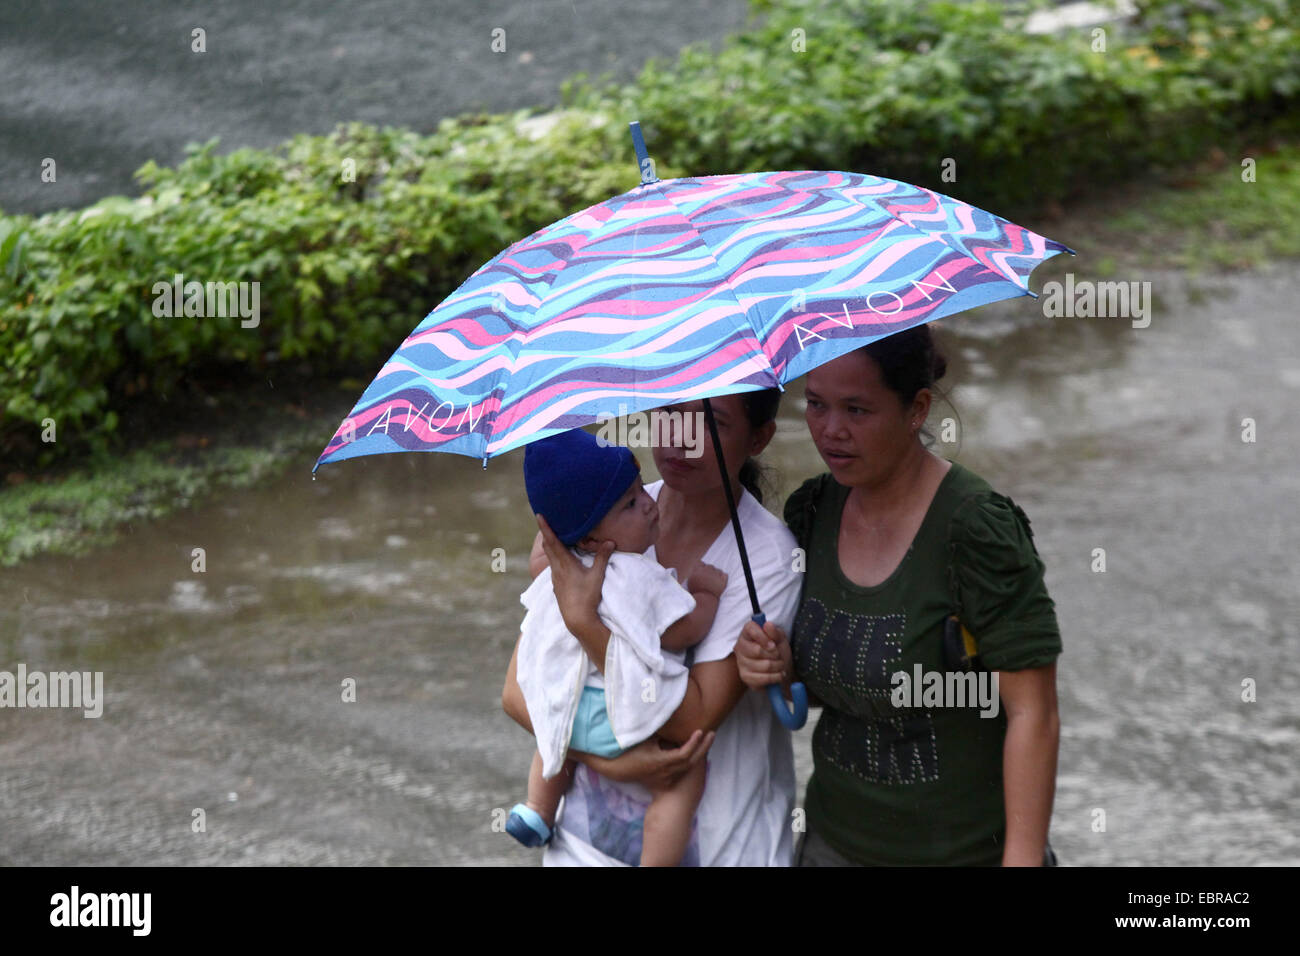 Quezon City, Philippines. 4th Dec, 2014. People walk with an umbrella in the rain in Quezon City, the Philippines, on Dec. 4, 2014. Typhoon Hagupit is packing maximum winds of 205 kph near the center and gustiness of up to 240 kph. The Philippine government will implement forced evacuation in areas that are expected to be hit by typhoon Hagupit (local name 'Ruby'), a senior government official said Thursday. Credit:  Rouelle Umali/Xinhua/Alamy Live News Stock Photo